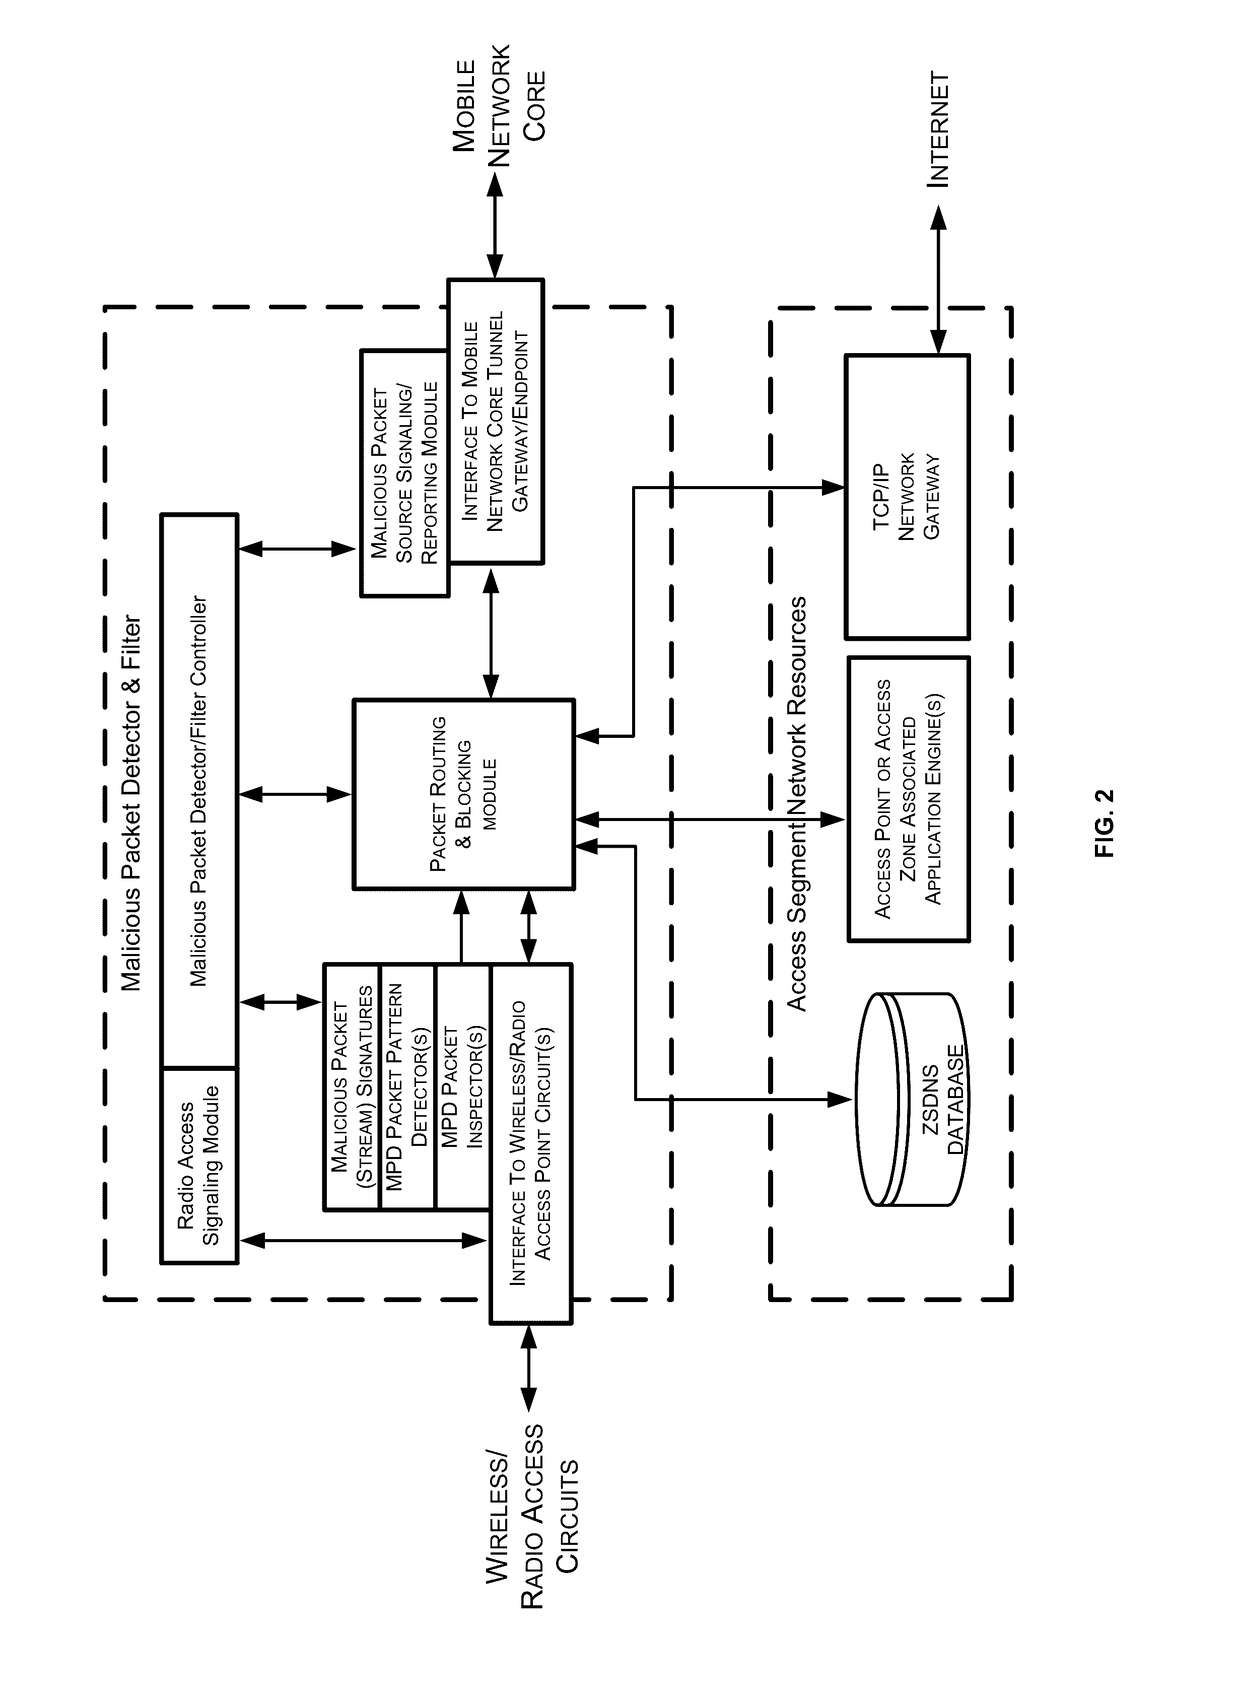 Method circuits devices systems and functionally associated computer executable code for detecting and mitigating denial of service attack directed on or through a radio access network